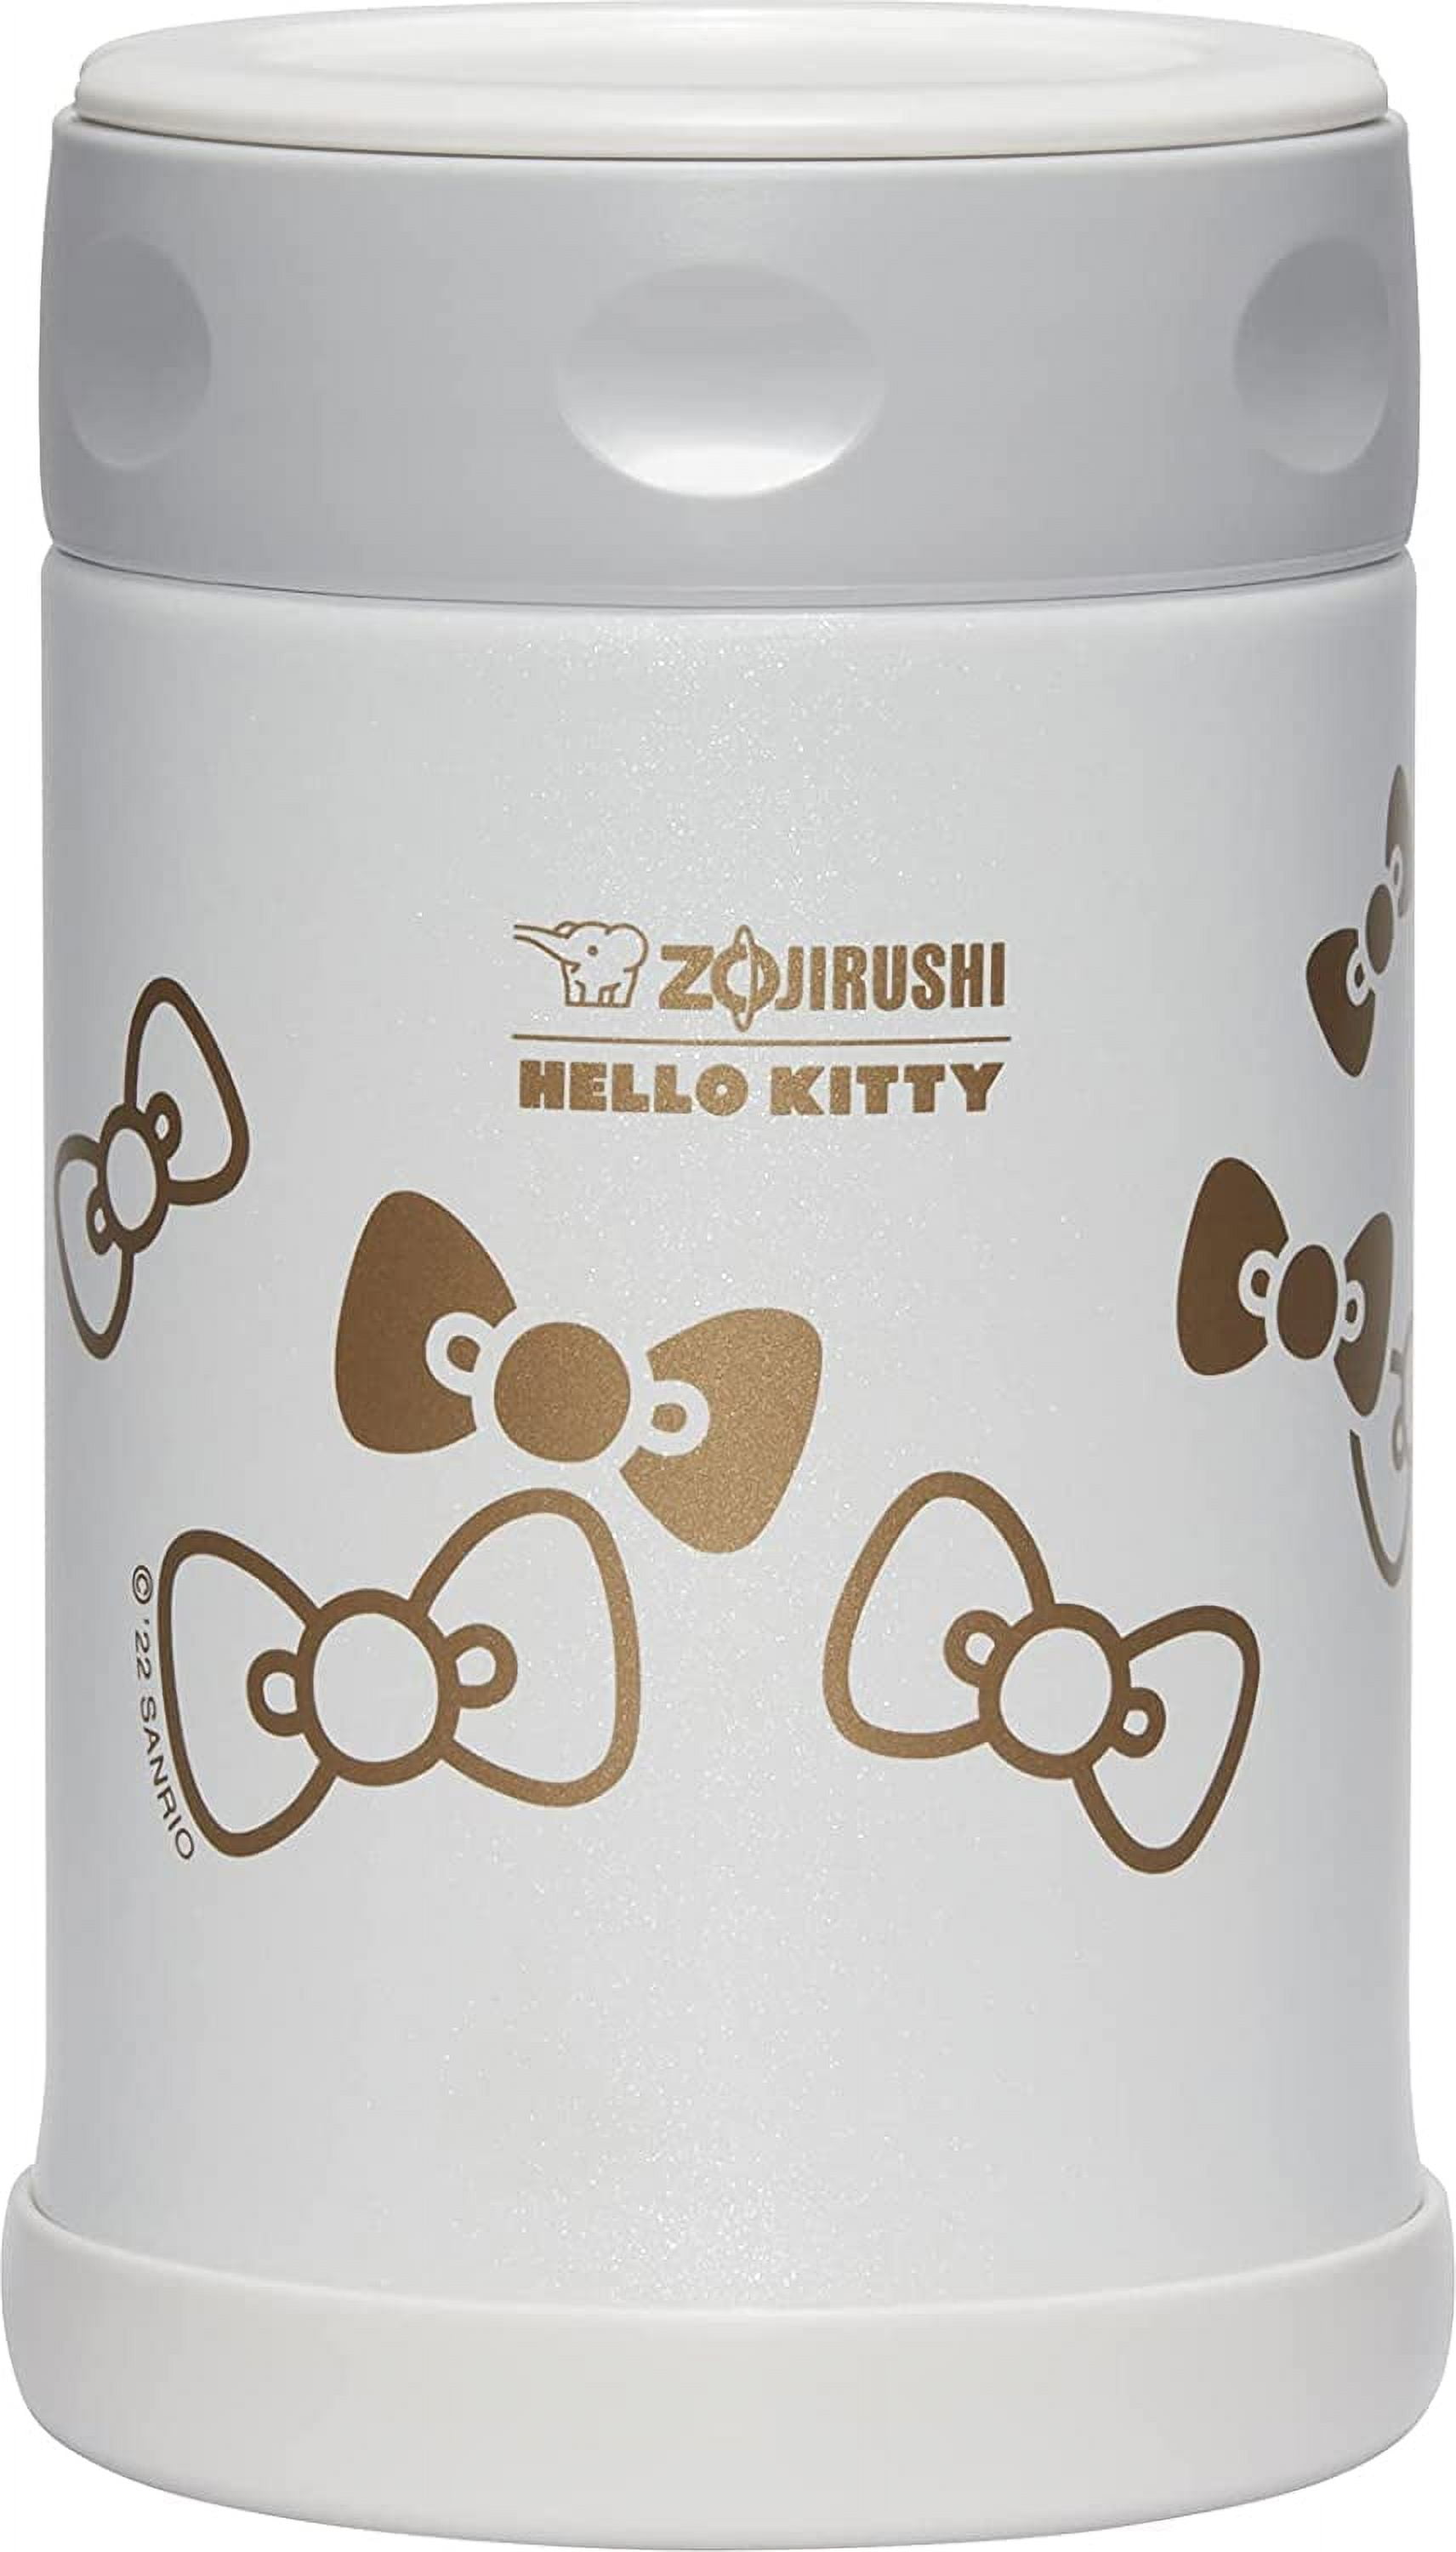 Kittylicious - Pre-order: Tatung rice cooker Hello Kitty Gold Edition  Limited Edition. 110V Size: 10 cups only